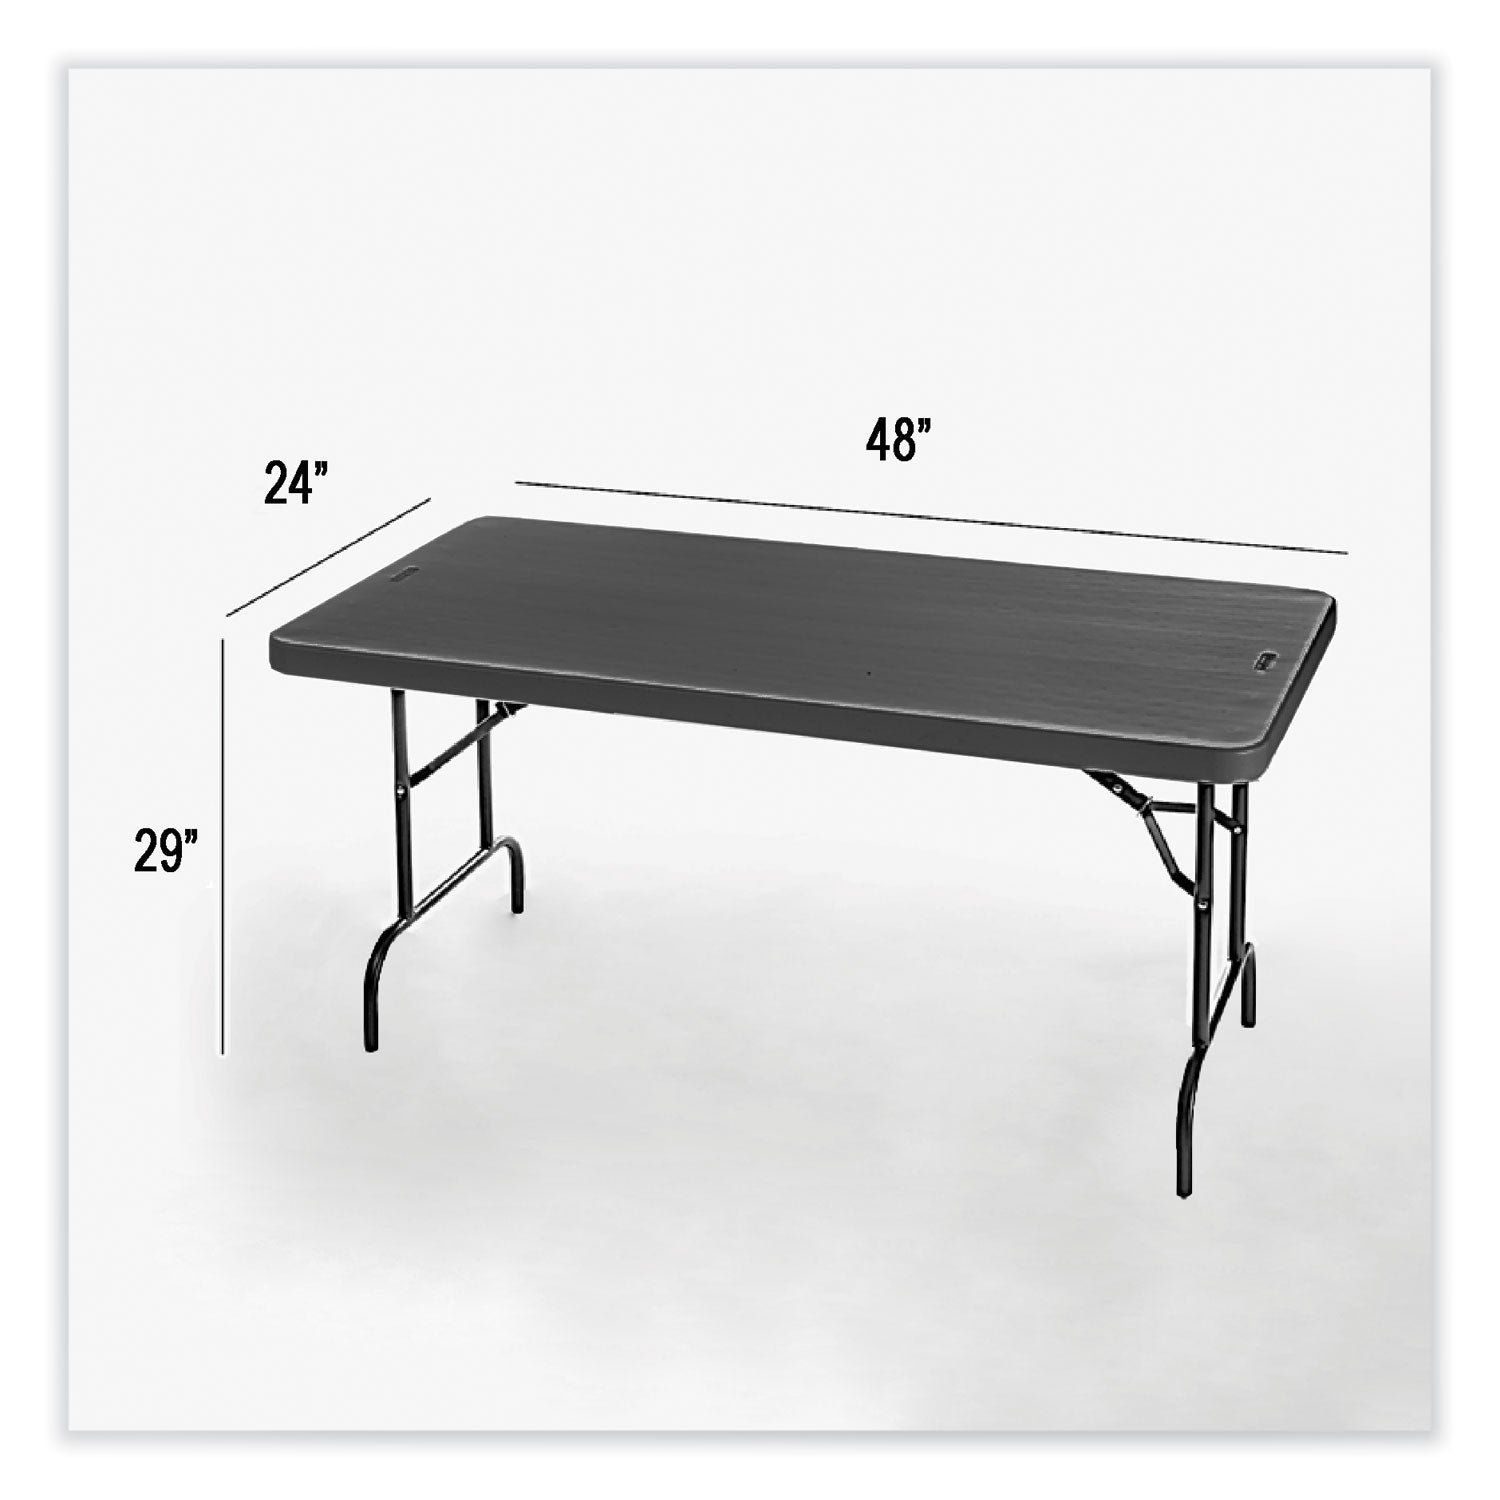 indestructable-commercial-folding-table-rectangular-48-x-24-x-29-charcoal-top-charcoal-base-legs_ice65507 - 4